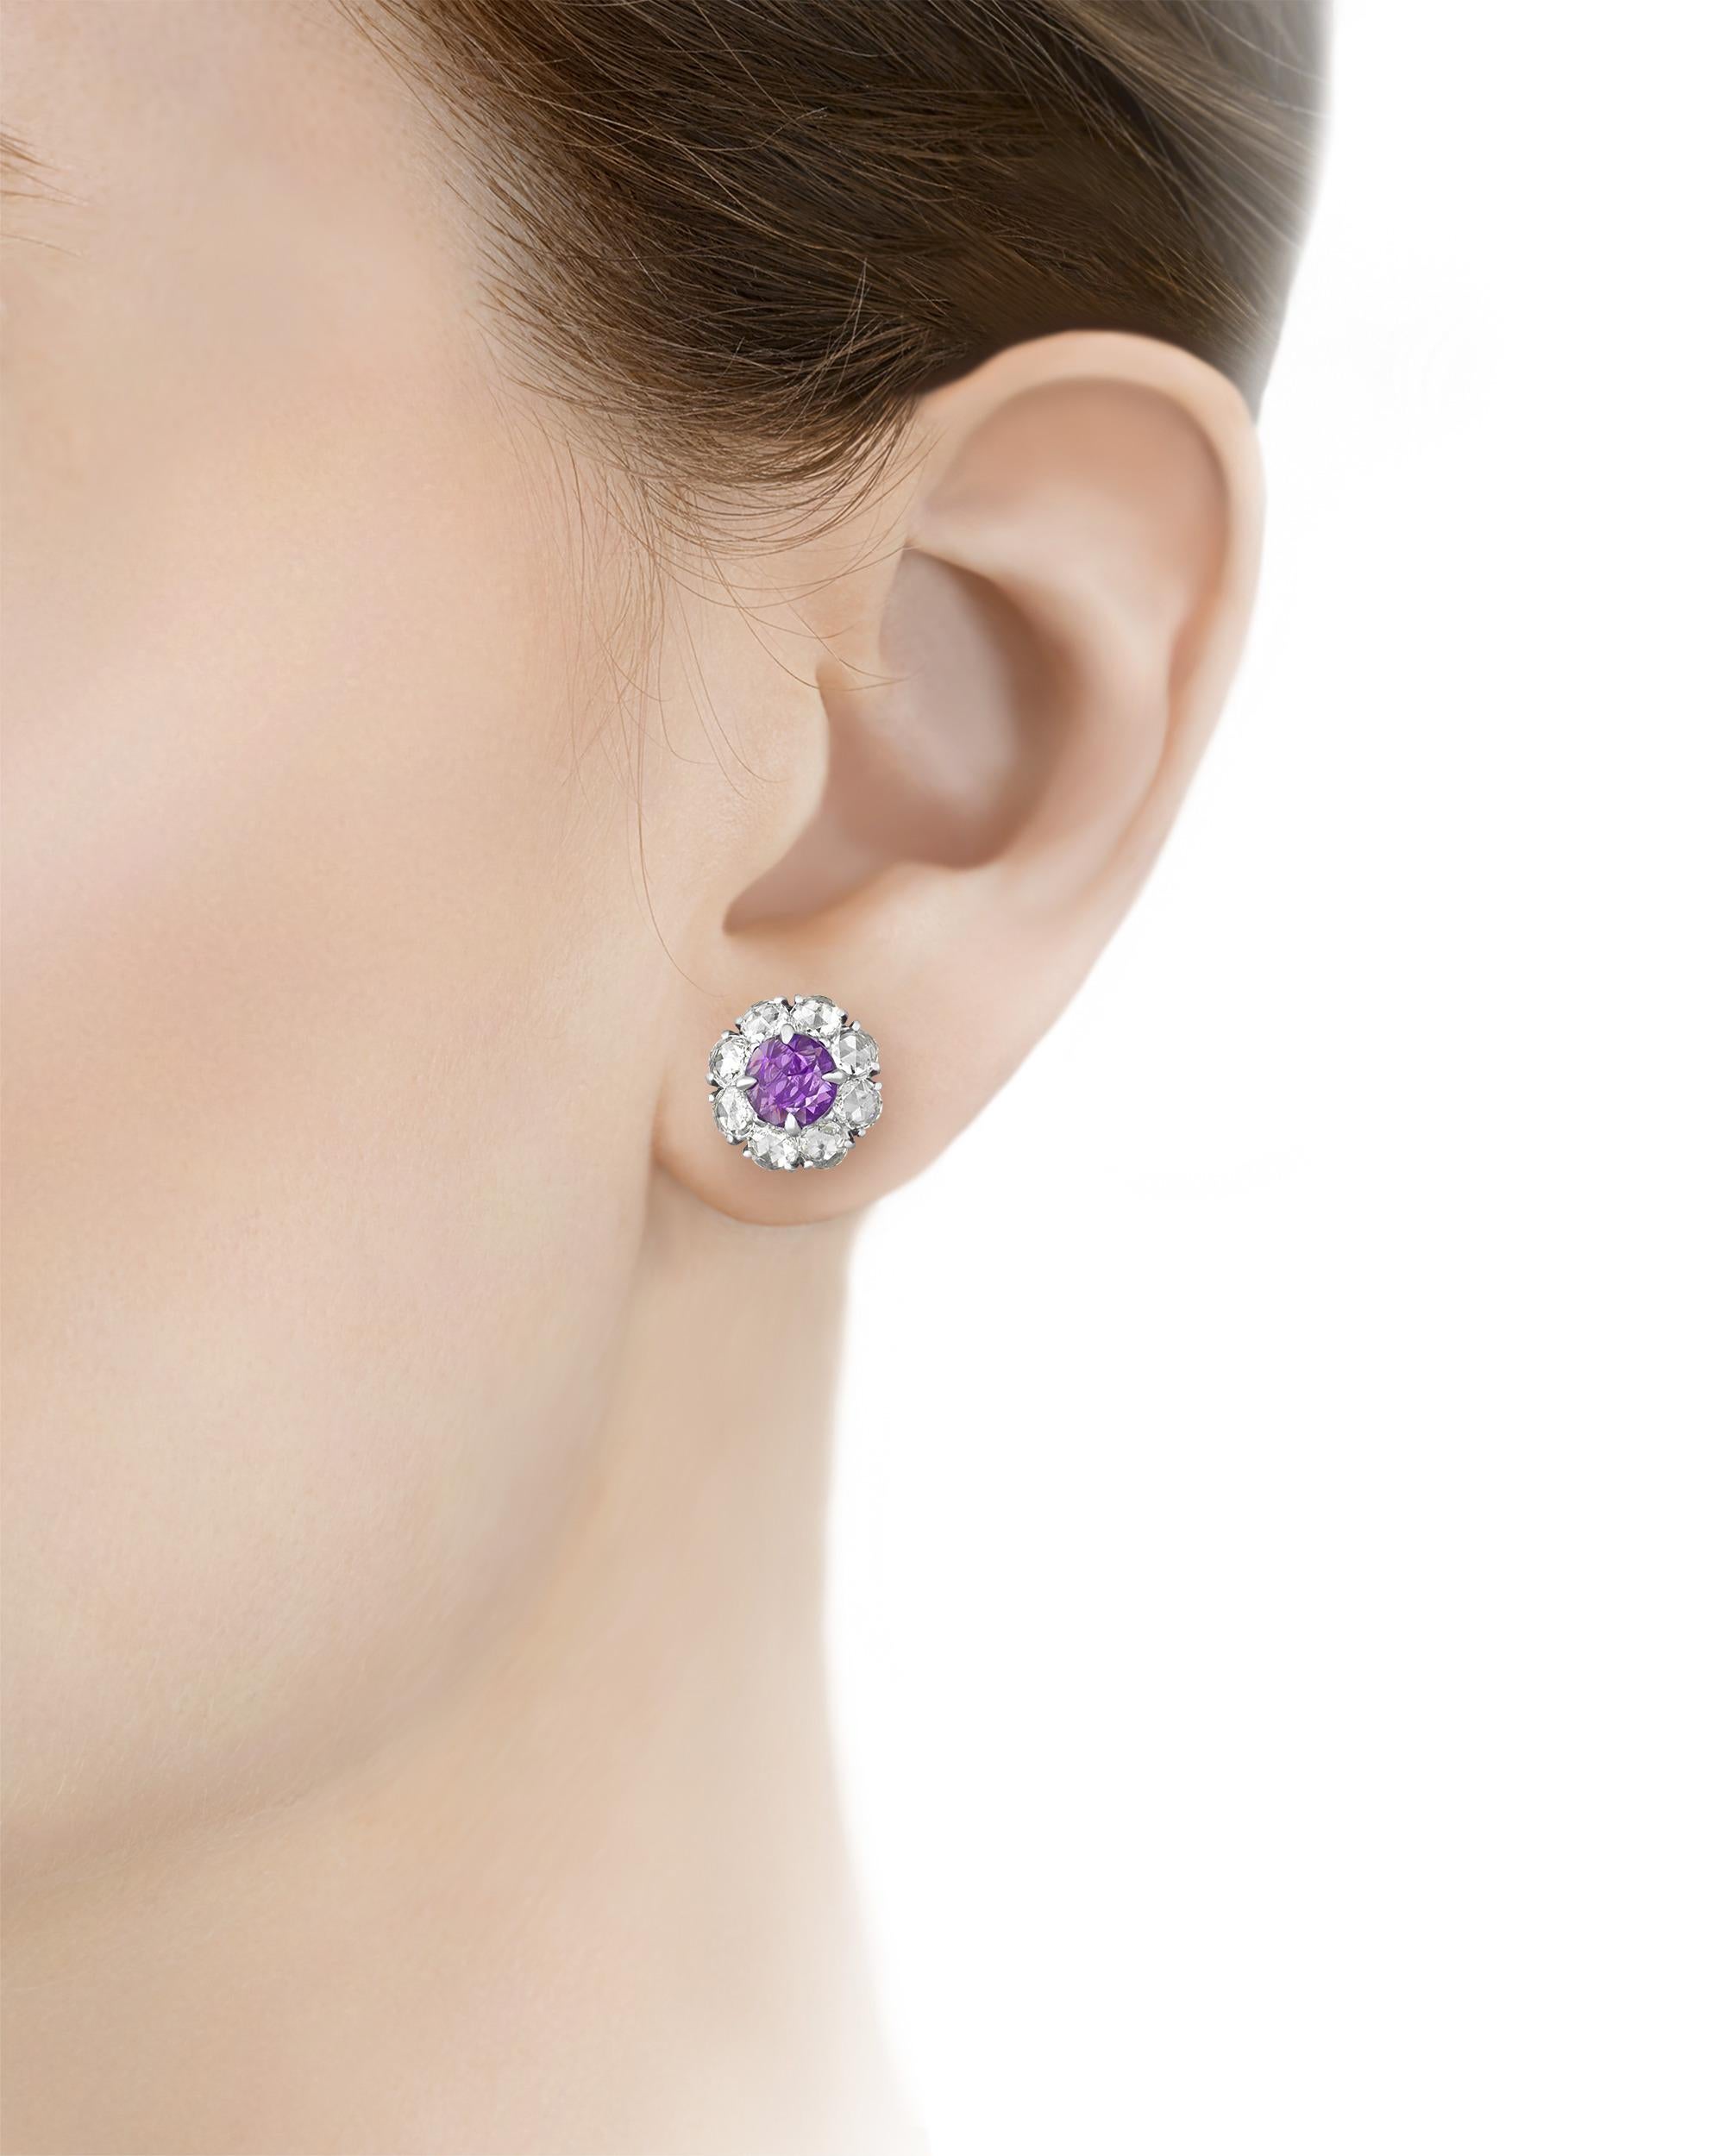 Displaying a remarkable lilac color, these elegant earrings feature two natural purple sapphires totaling 2.42 carats. These gemstones are certified by C. Dunaigre as being Madagascan in origin and natural, without any heating treatments to enhance